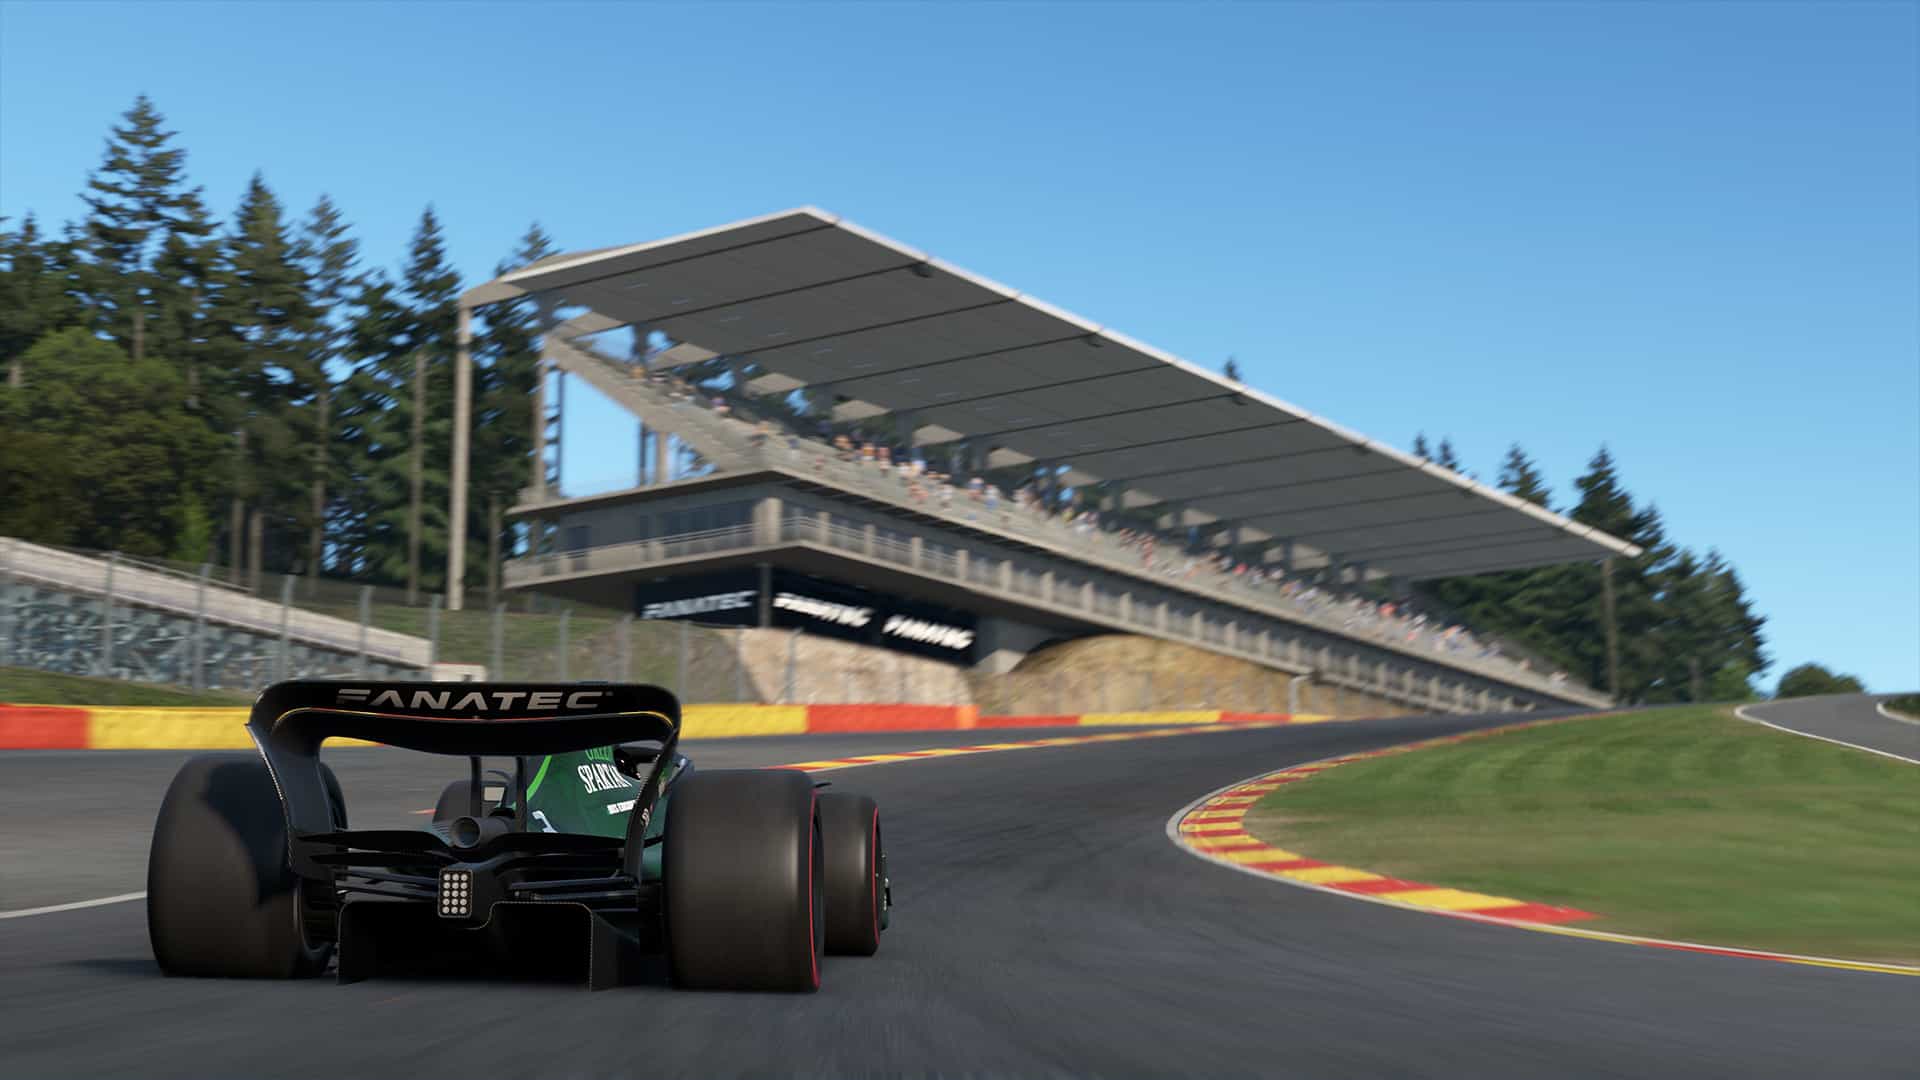 Automobilista v1.41 update adds new cars and tracks, including Spa 2022